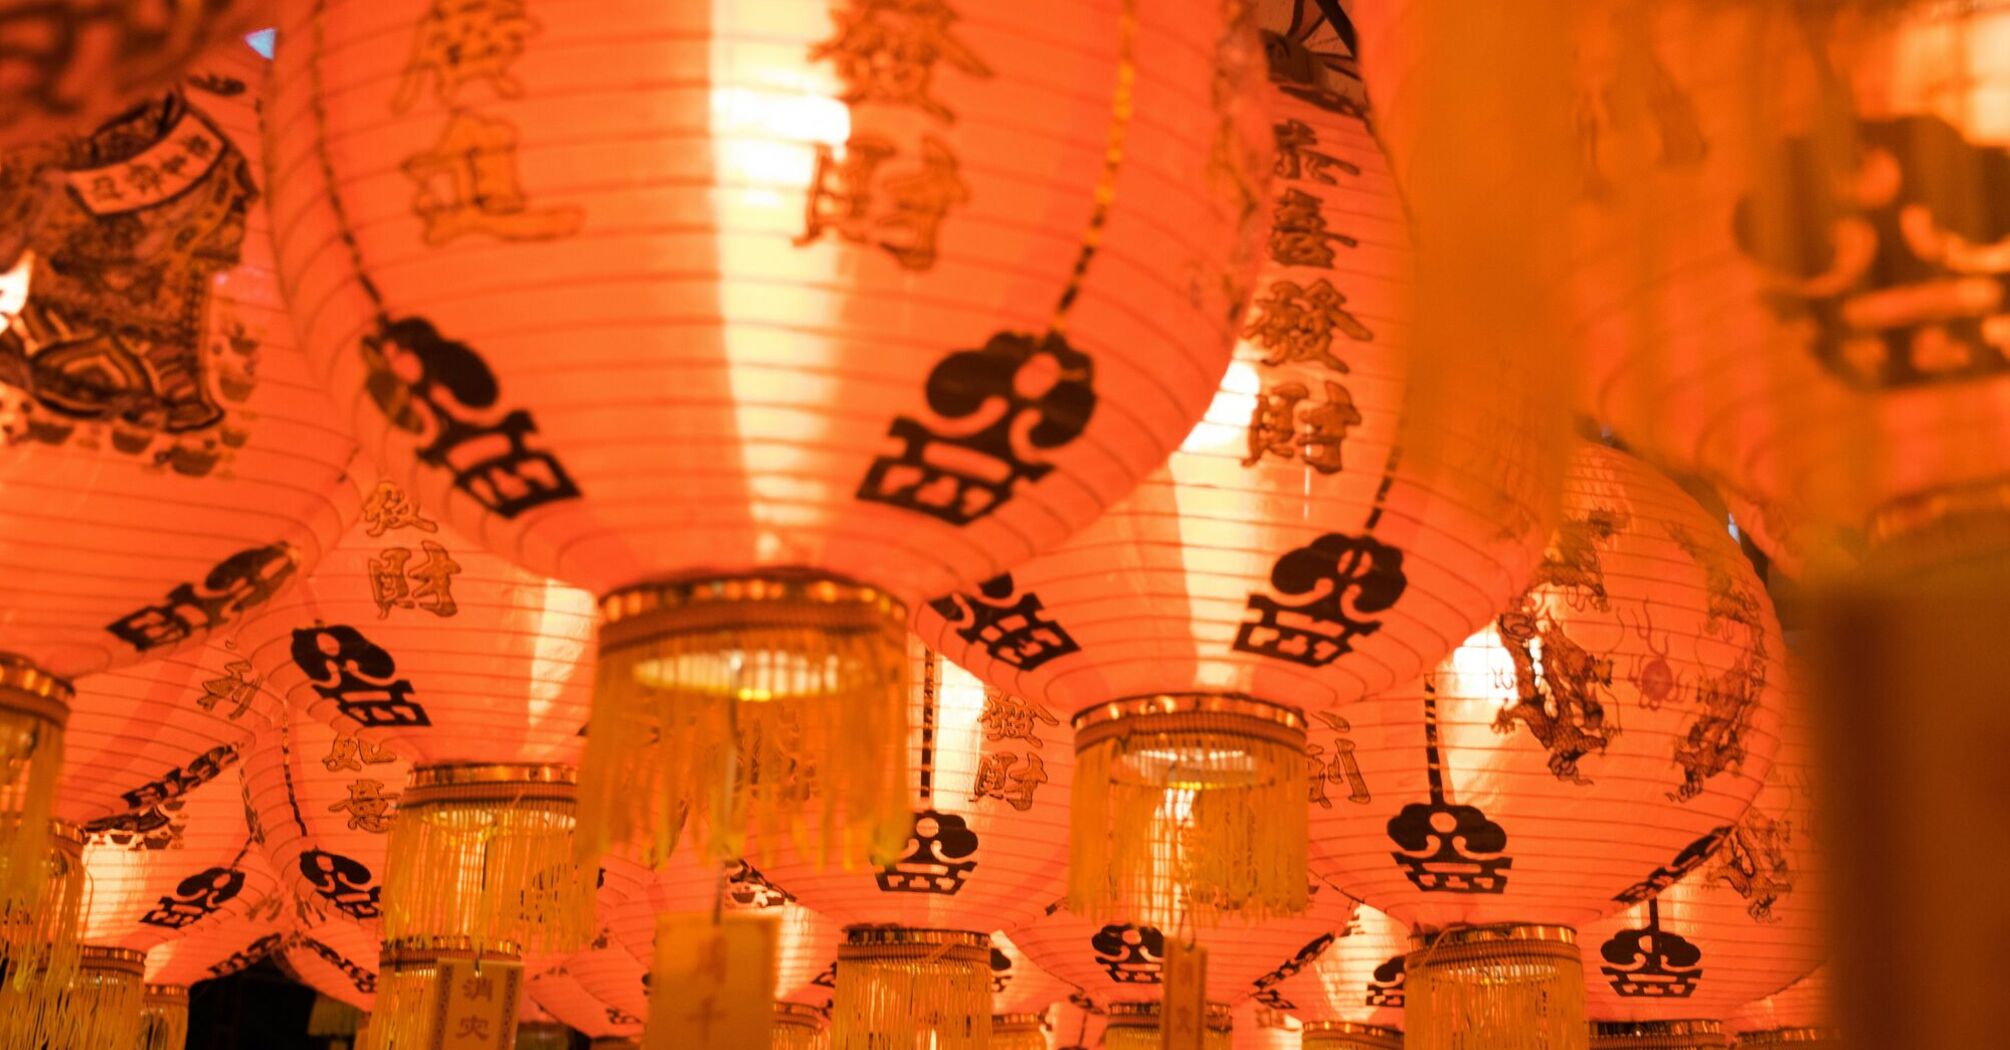 Red Chinese lanterns illuminated from within, with decorative patterns and Chinese characters, hanging closely together